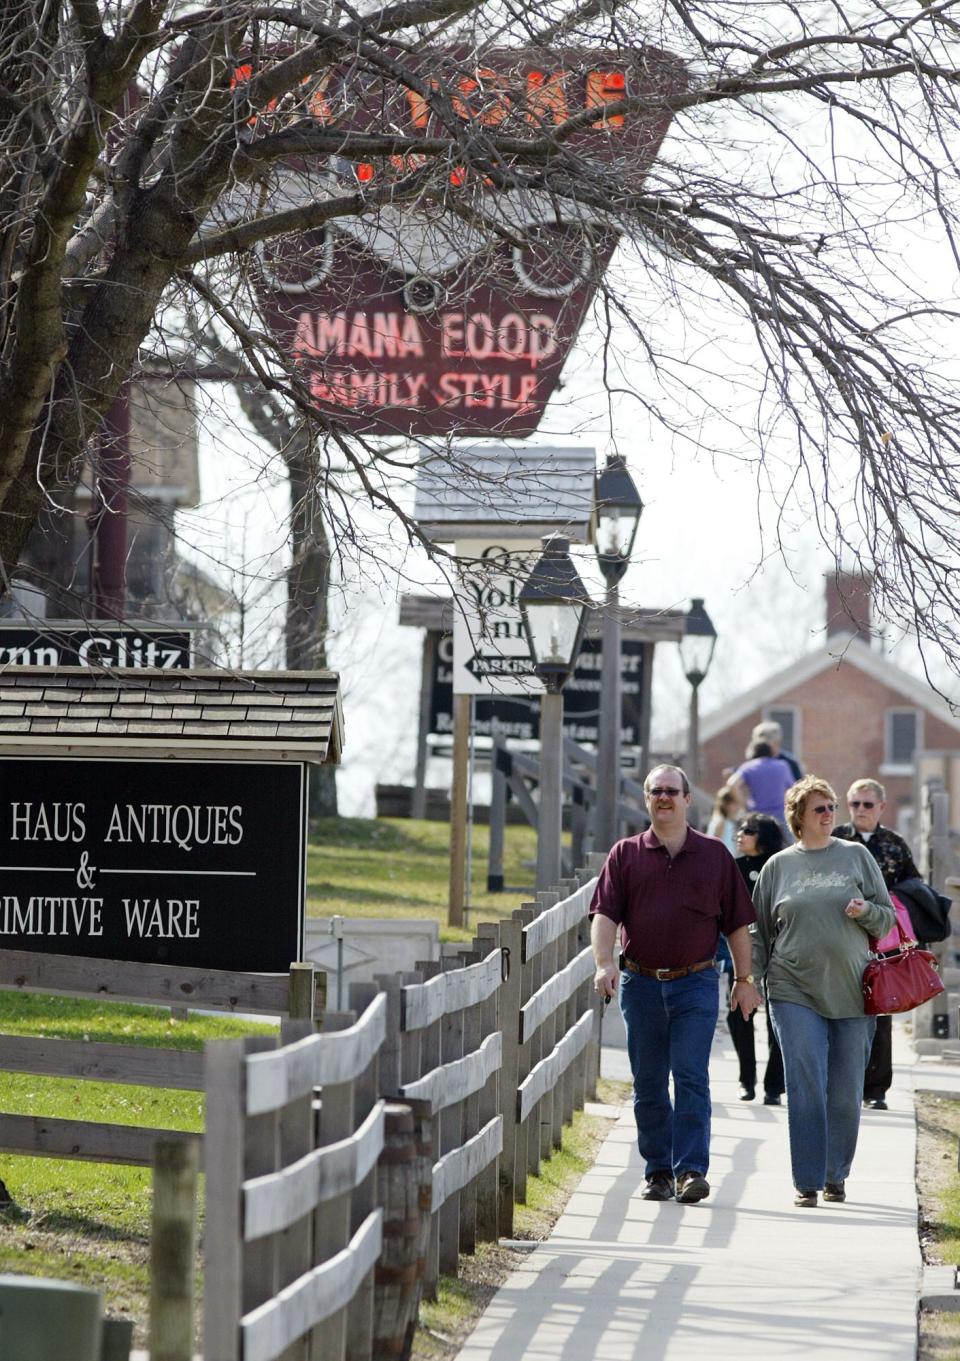 Tourists walk past restaurants and shops in the historic Germanic town of Amana.